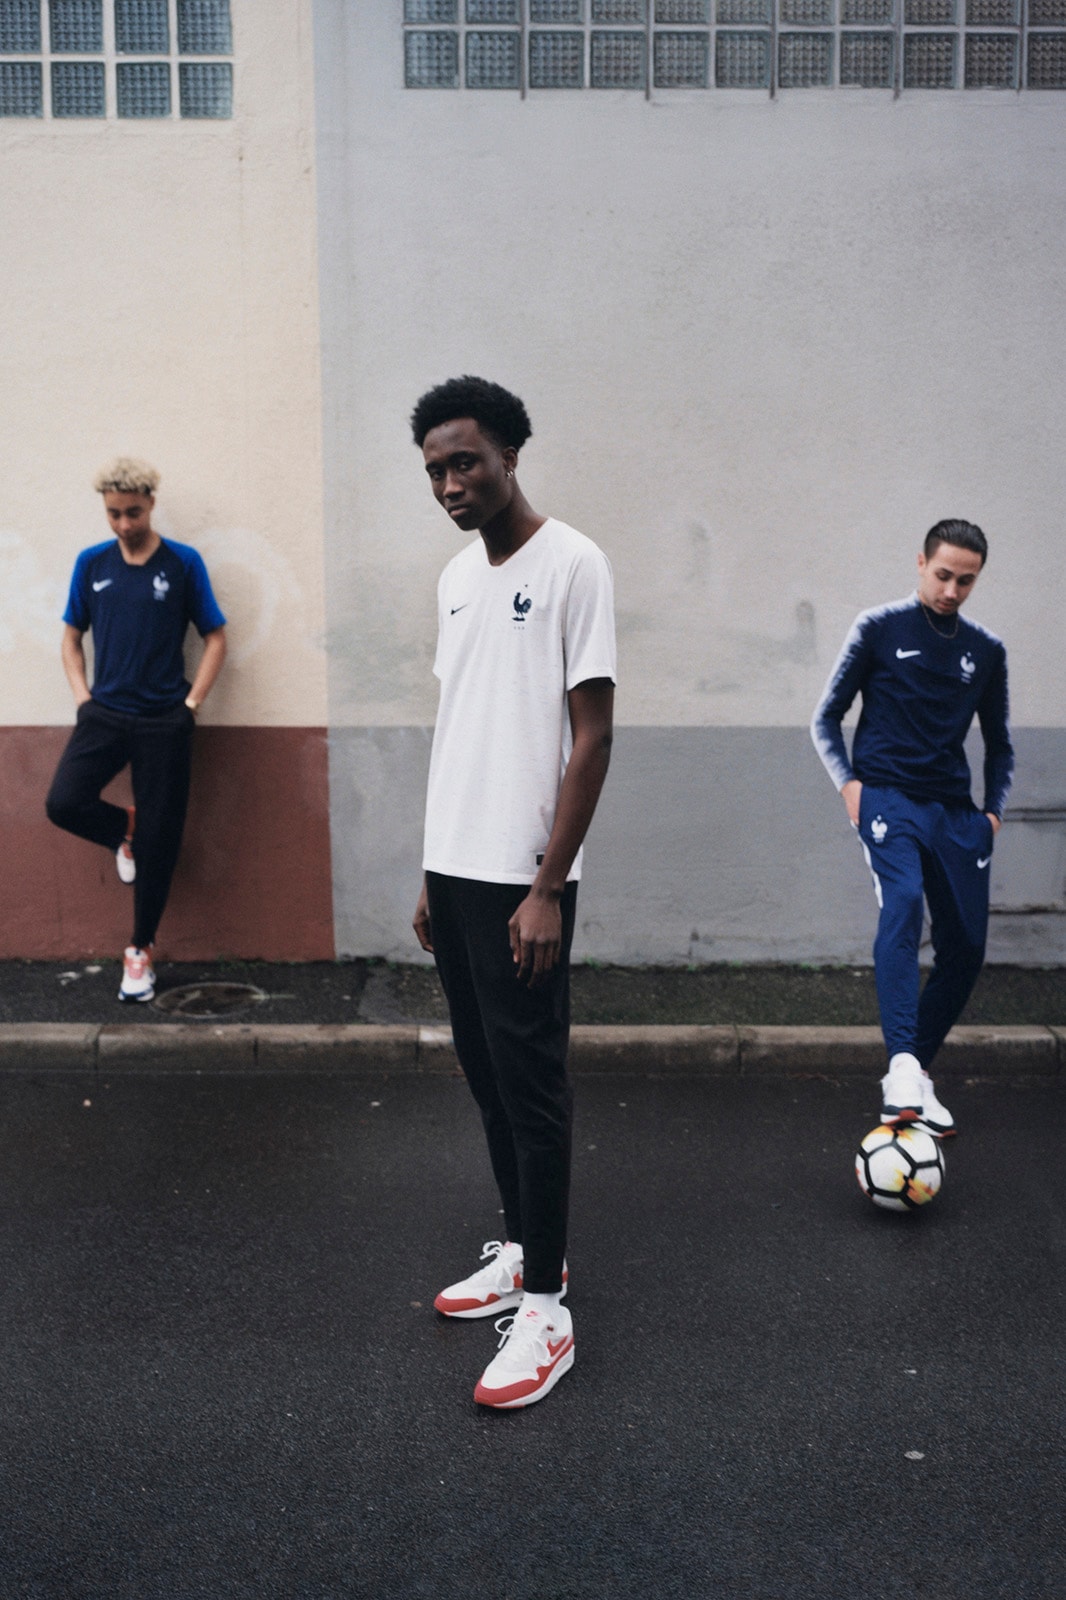 Nike Football French World Cup 2018 Soccer Collection Home Kits Jersey Away Kit FIFA Warm Up Tricolore Mariniere Release Info Buy Details Kingsley Coman Raphael Varane